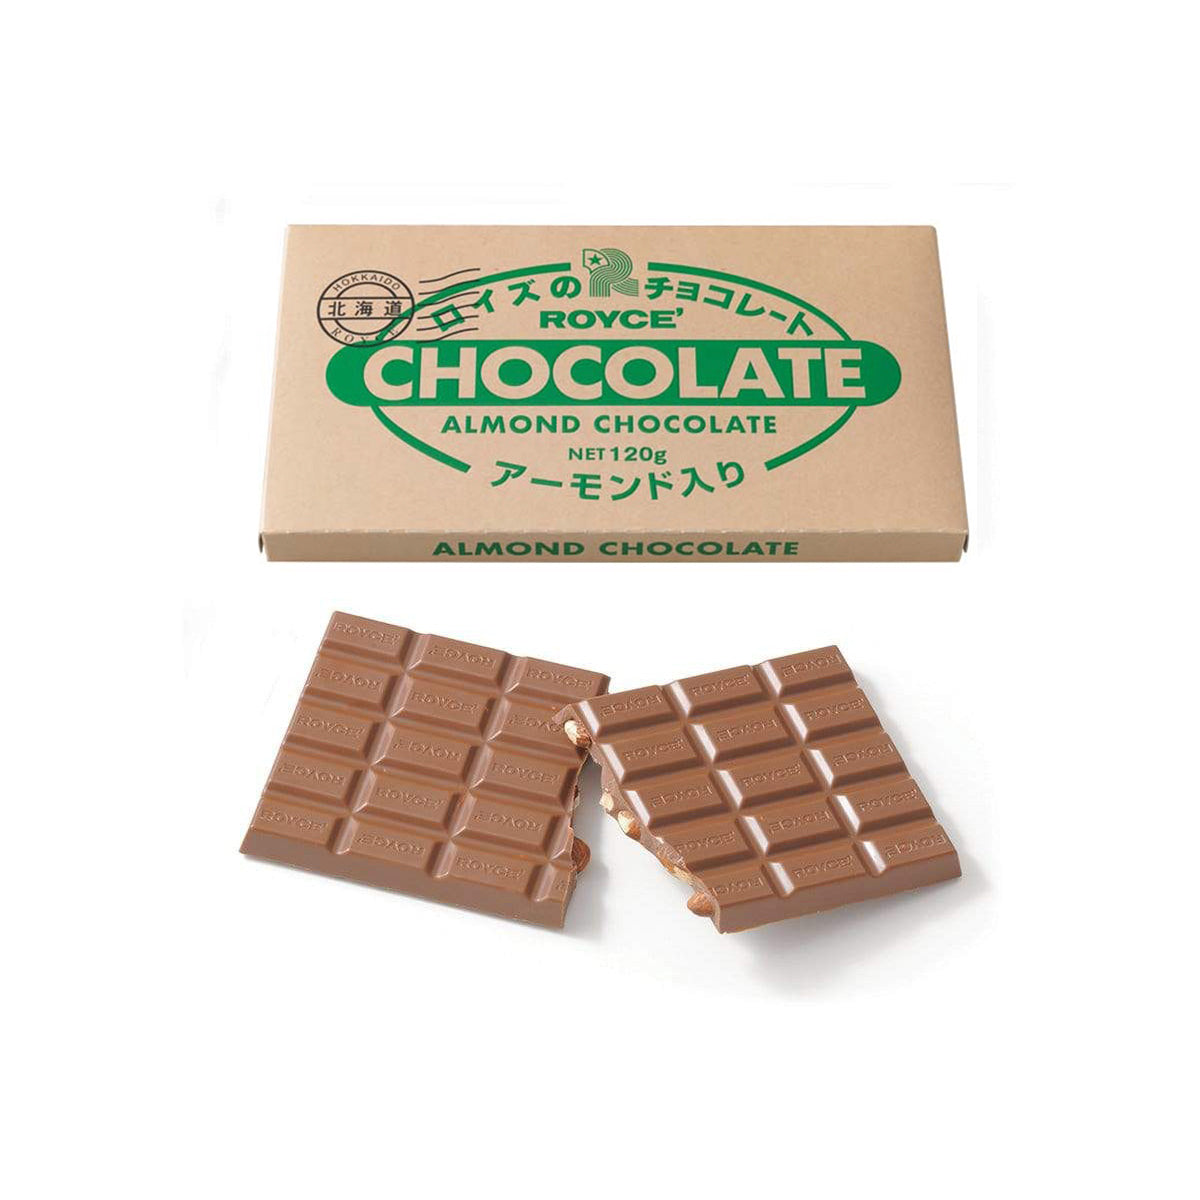 ROYCE' Chocolate - Chocolate Bar "Almond" - Image shows a chocolate carton. Text in black says Hokkaido ROYCE'. Text in green says ROYCE' Chocolate Almond Chocolate Net 120g. Text on bottom part says Almond Chocolate. Image below shows brown chocolate bars with almonds and the word "ROYCE'" engraved.